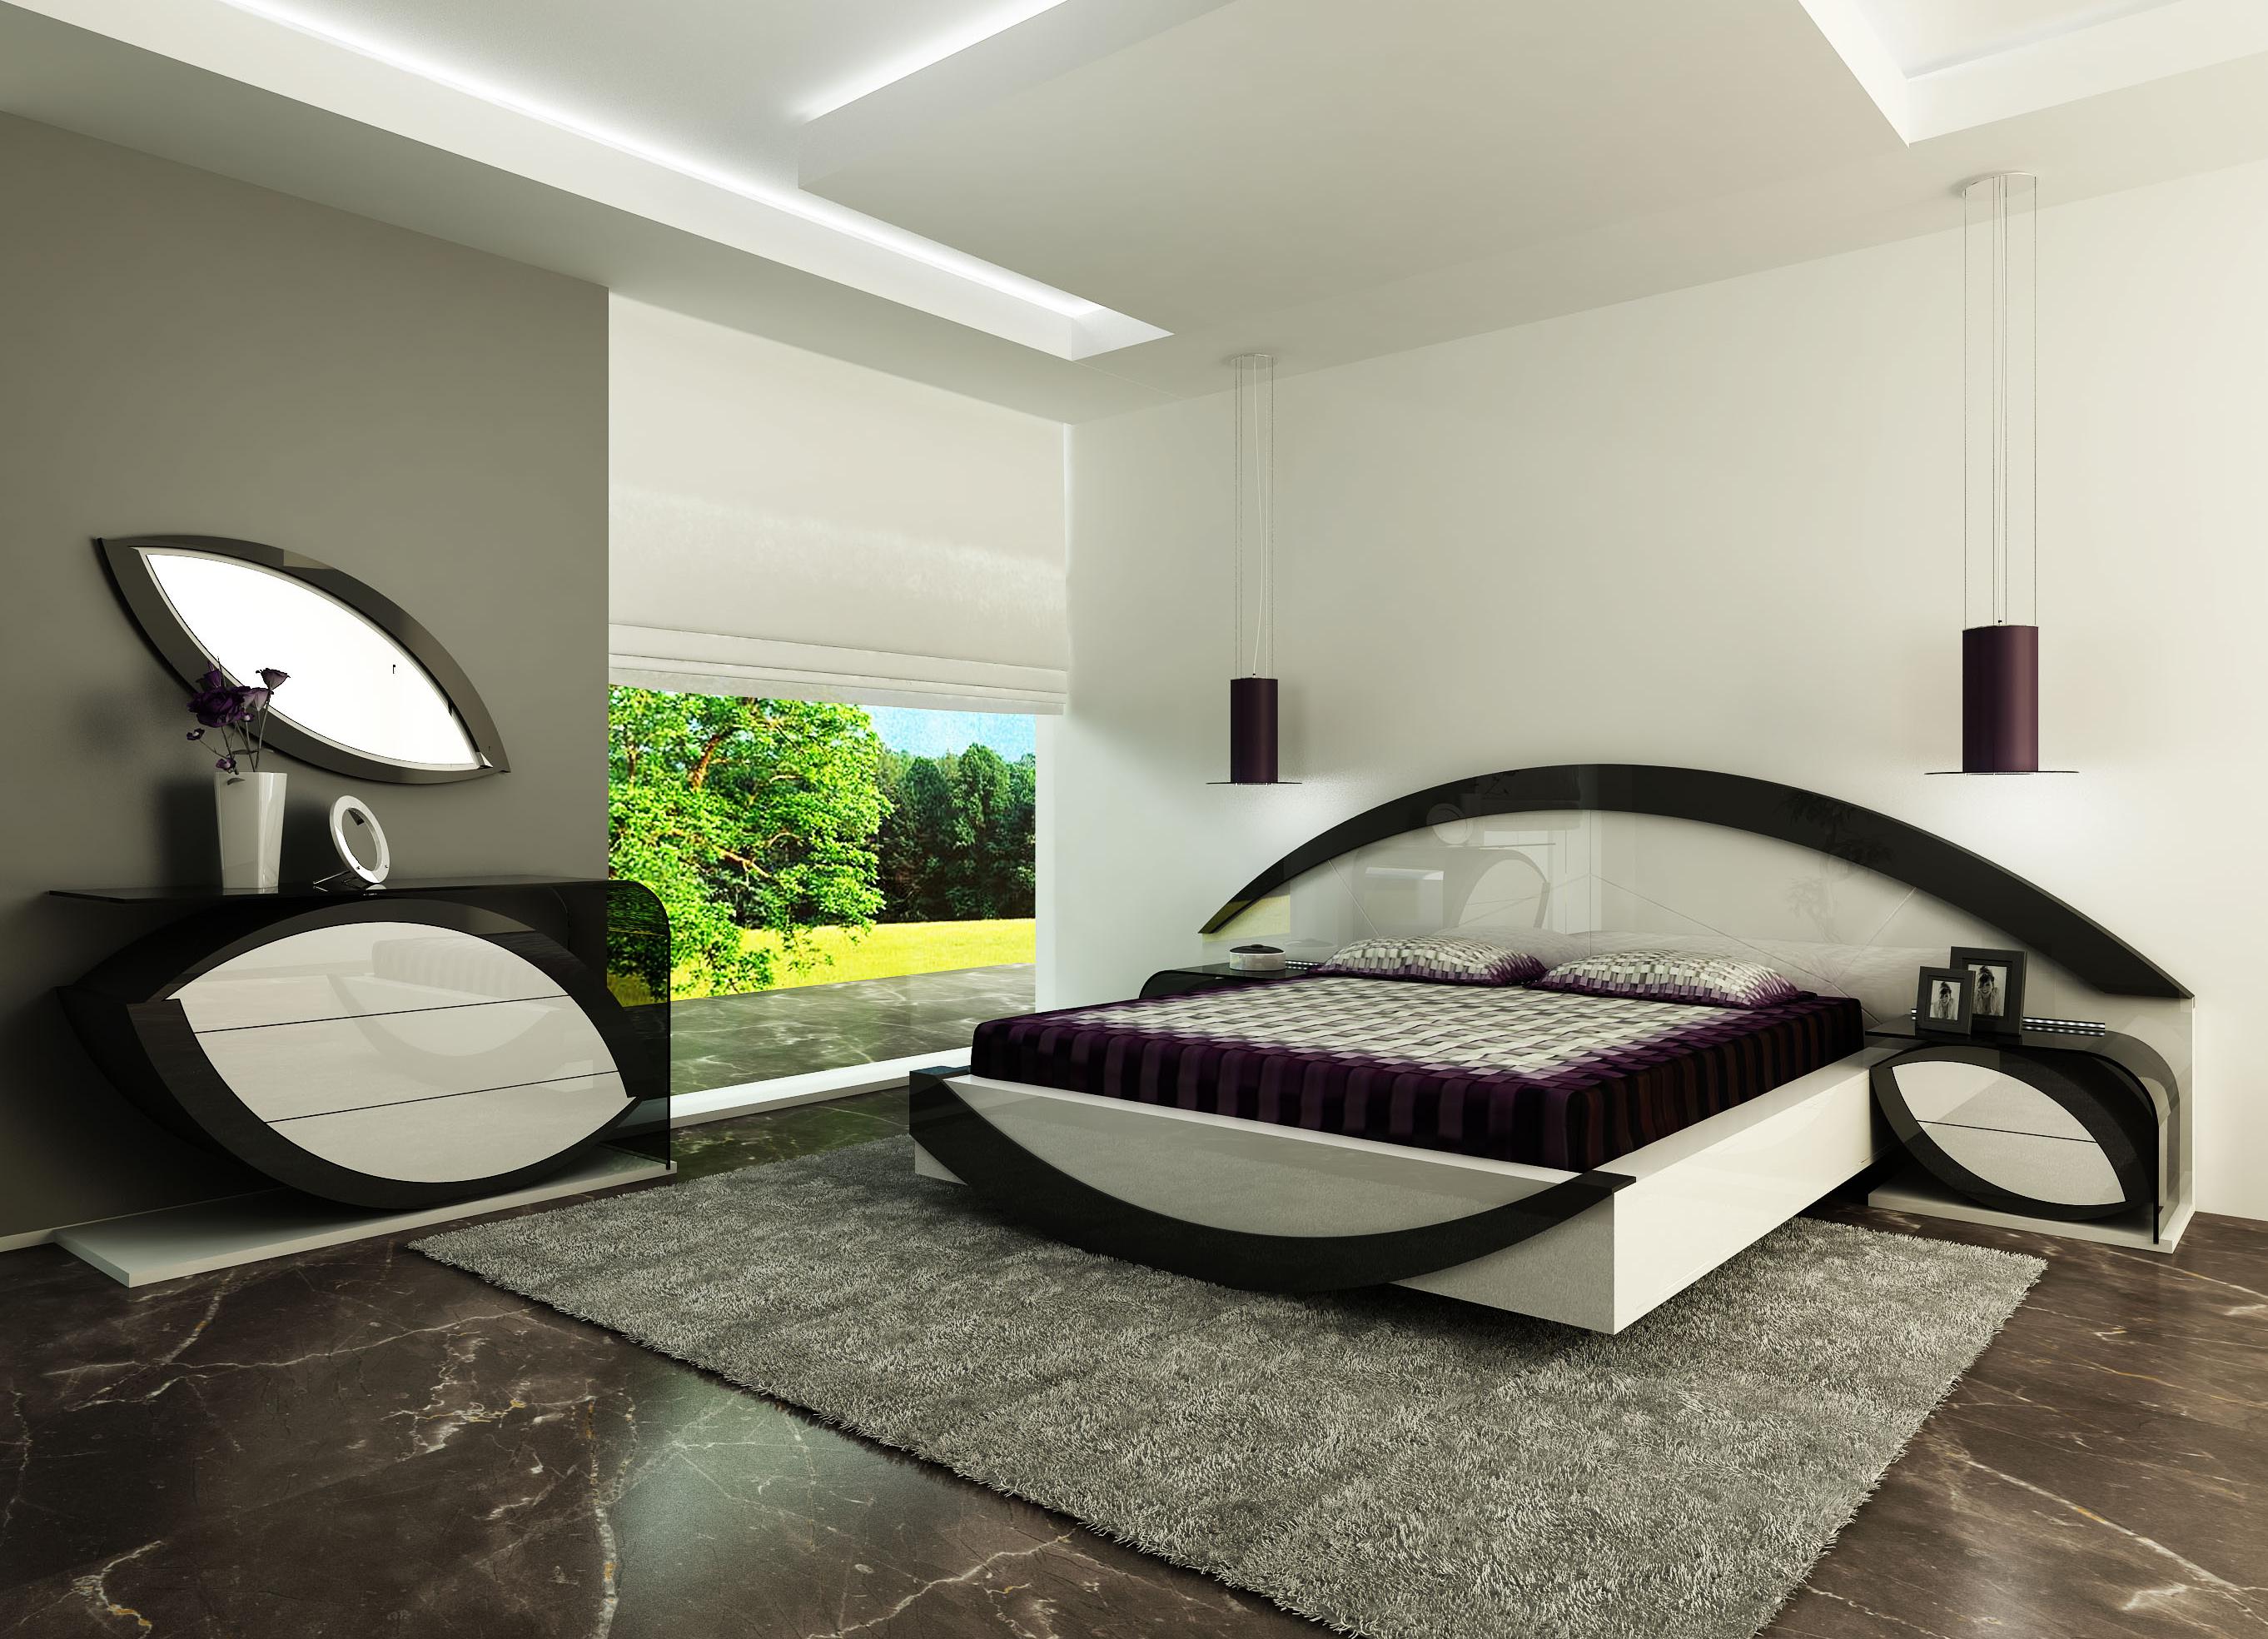 excellent-home-interior-modern-bedroom-furniture-design-ideas-with-the-best-black-hardwood-high-curving-headboard-including-interisting-low-profile-creamy-bedframe-near-beautiful-glass-windows-coverin